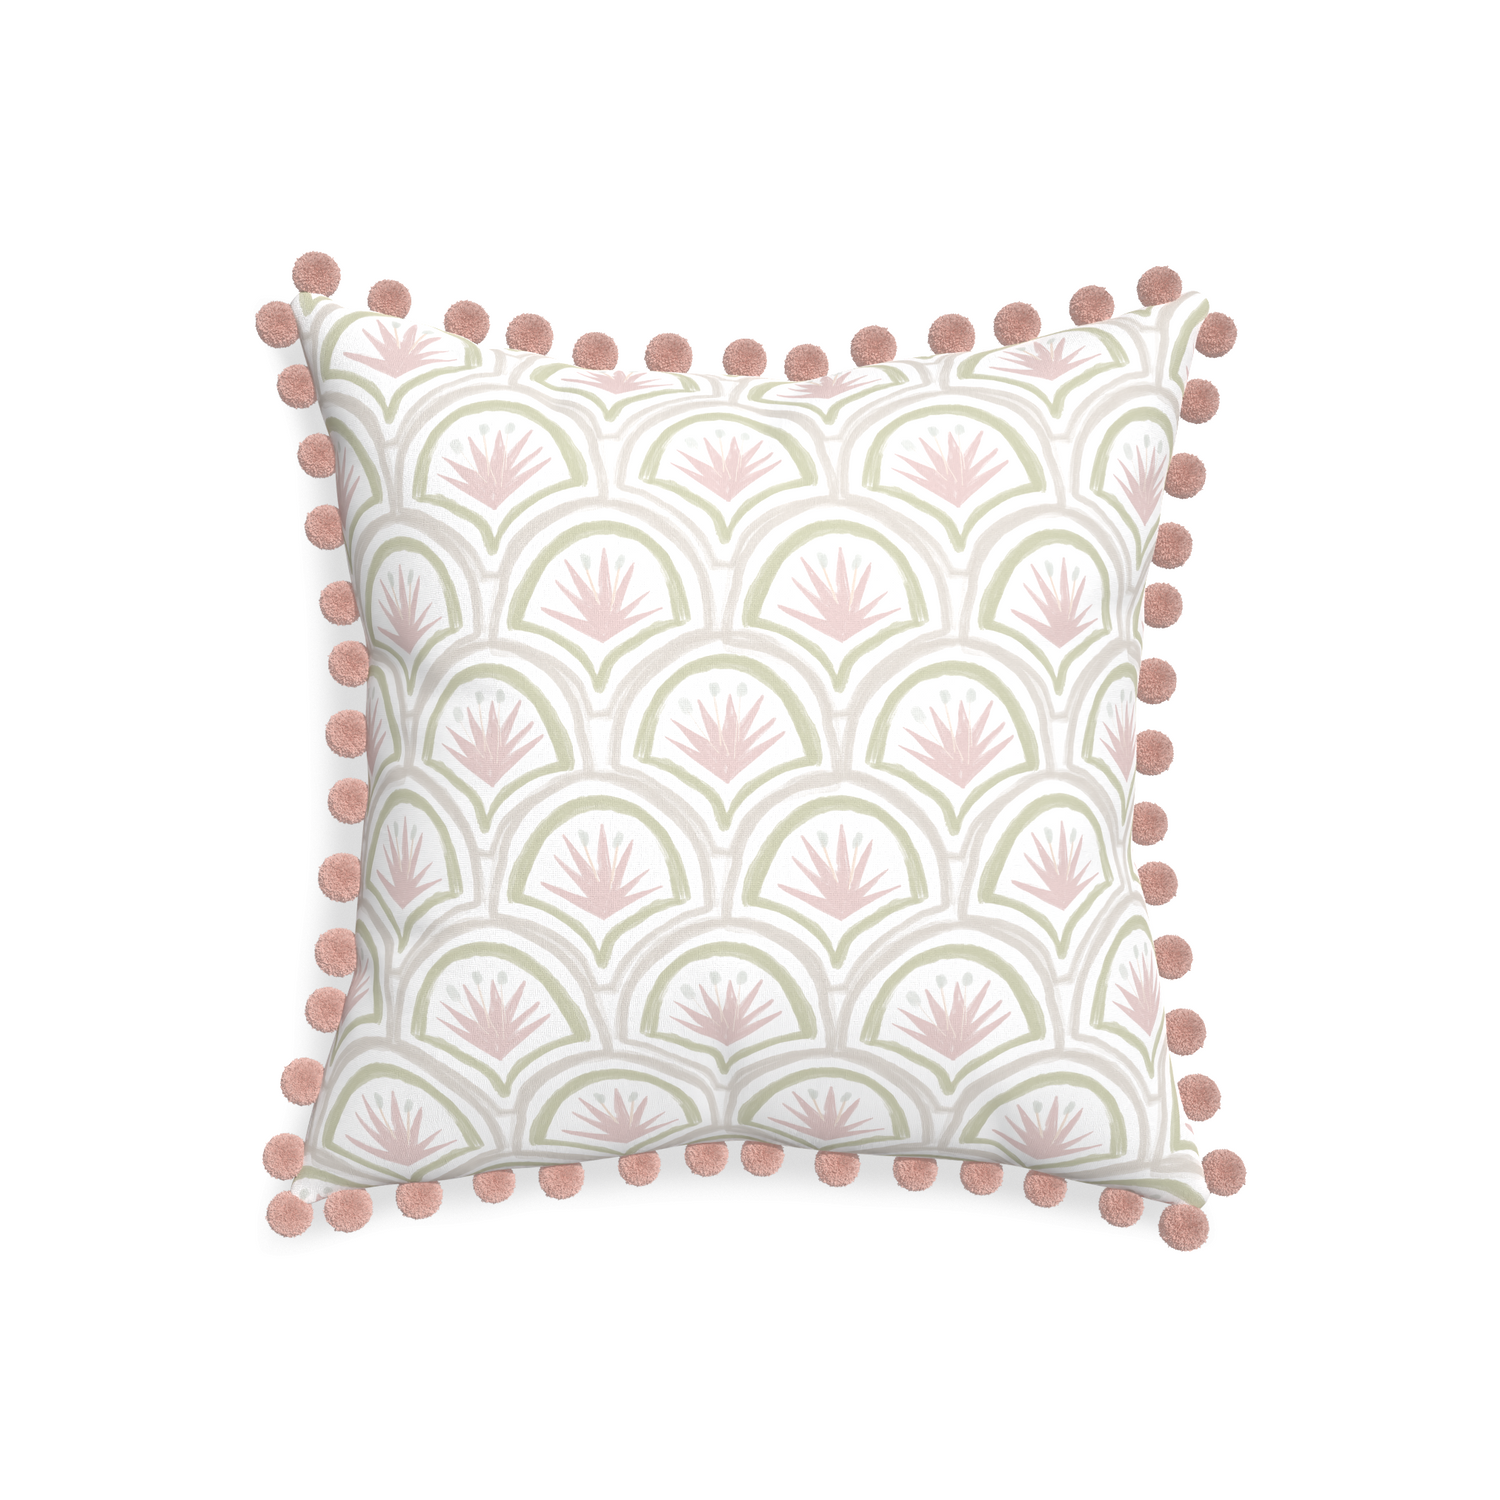 20-square thatcher rose custom pink & green palmpillow with rose pom pom on white background